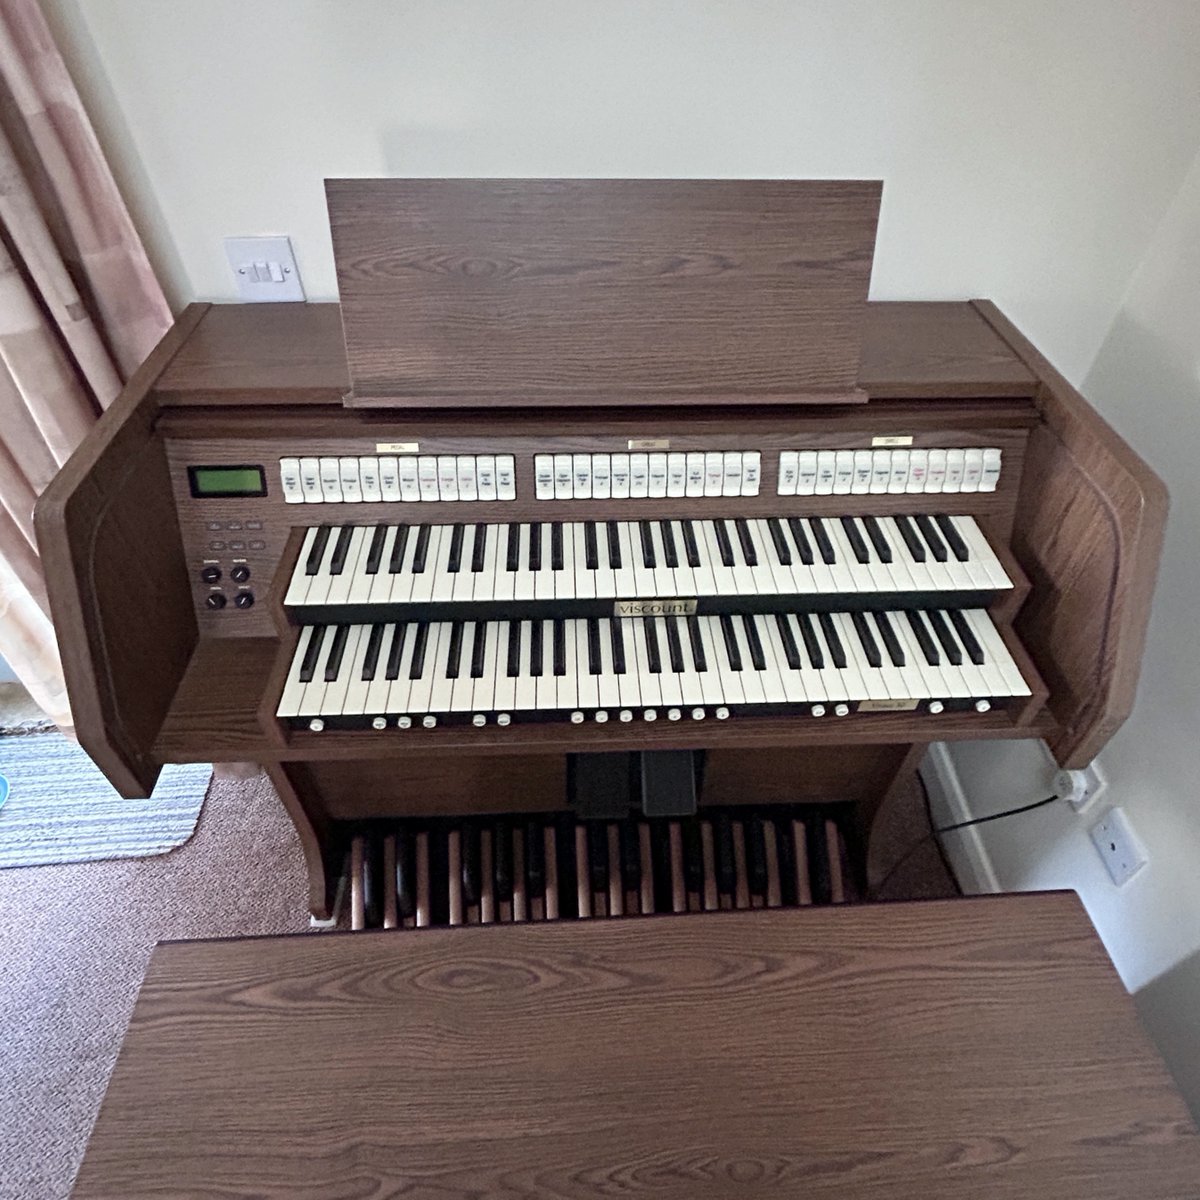 Our final and most memorable delivery of 2022. We travelled over 350 miles to the incredibly picturesque Thornton Le Dale in North Yorkshire On Dec 24 to fulfil this customer's wish. Happy New Year to all our friends and customers! #HomePractice #DigitalOrgan #MusicInEducation